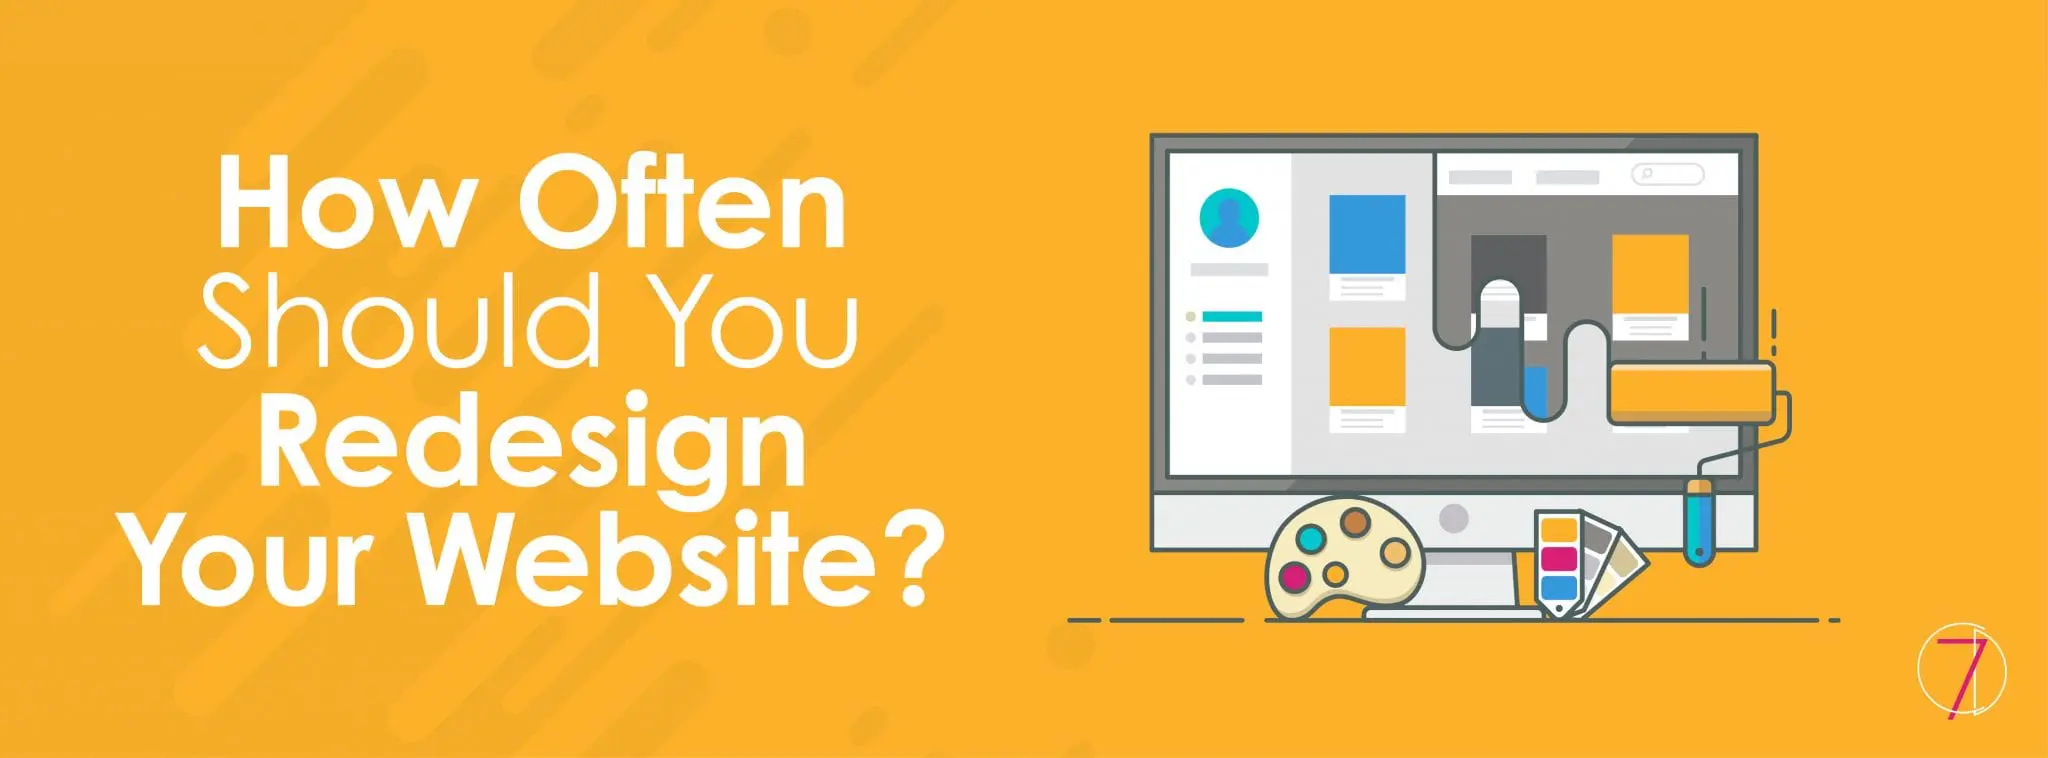 How-often-should-you-redesign-your-website